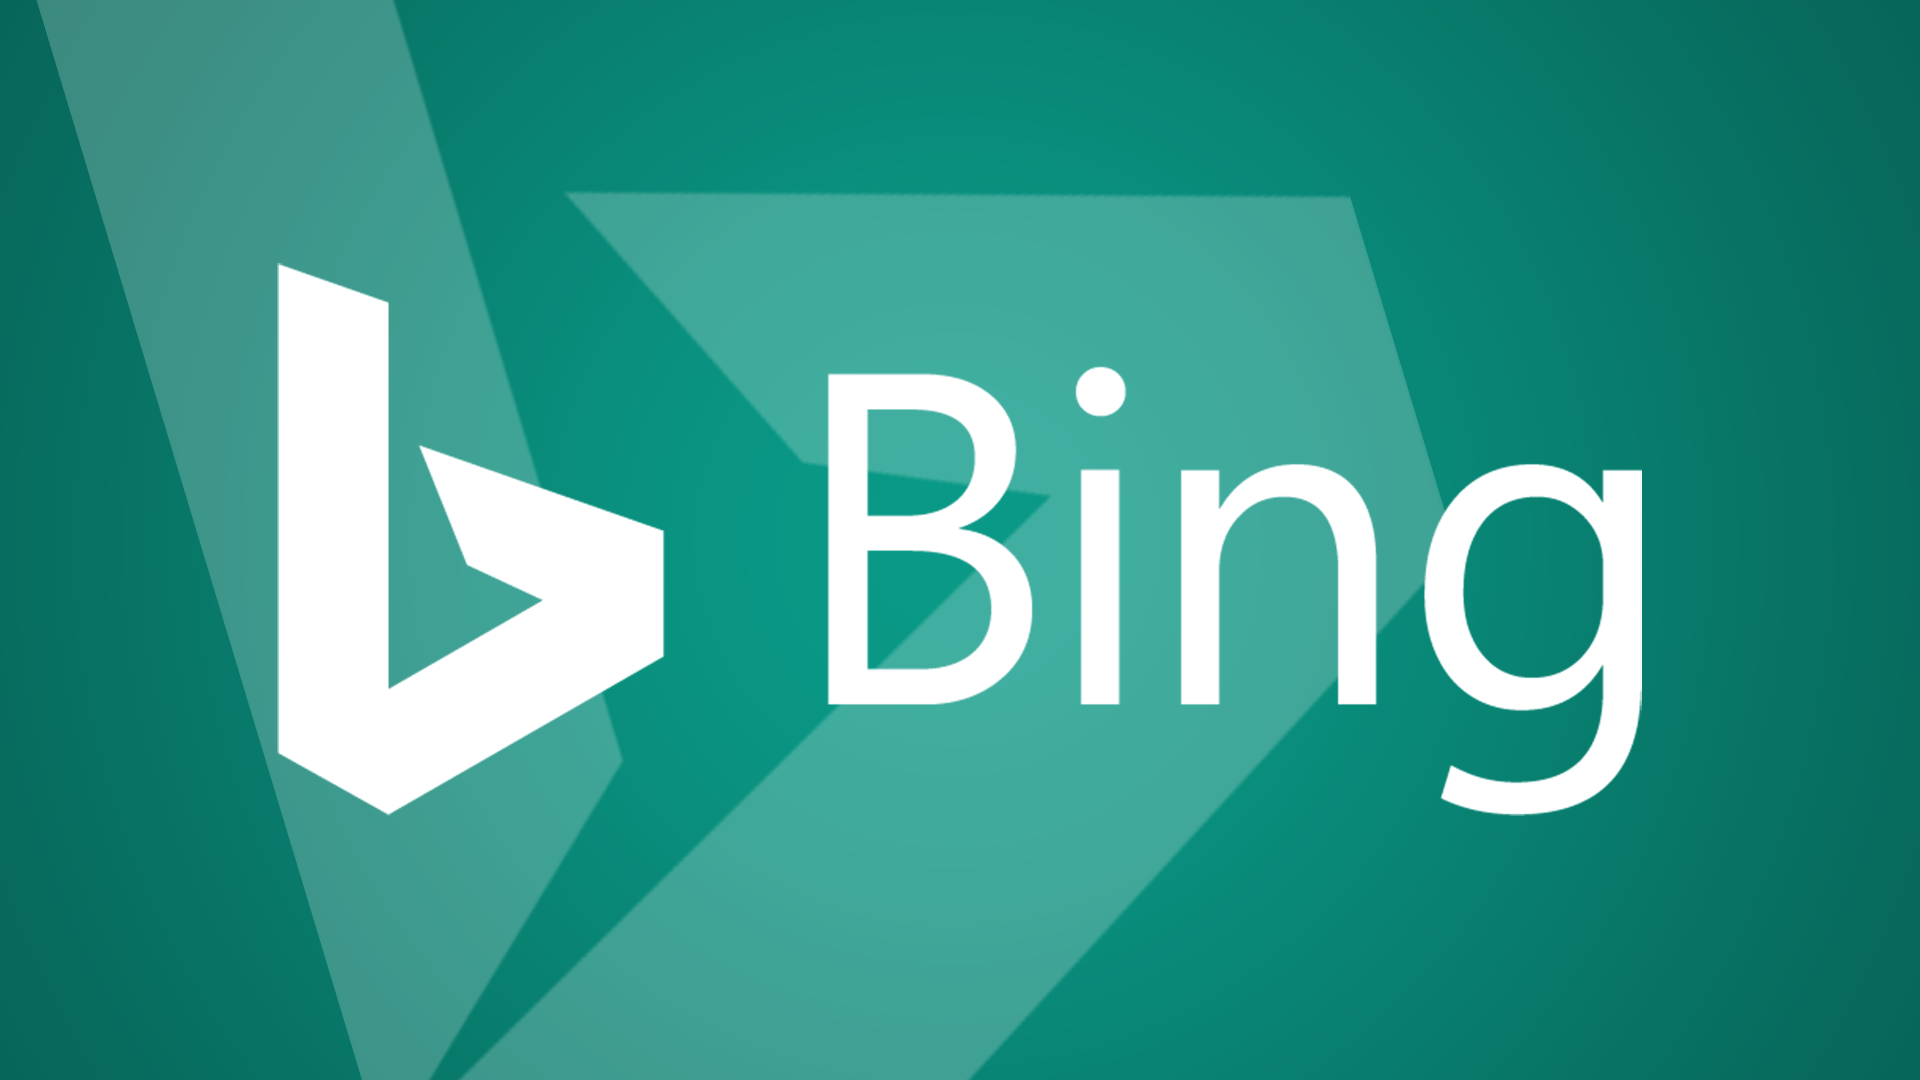 Bing Teal Logo - The next Bing thing: Get your Bing campaigns in top shape for 2017